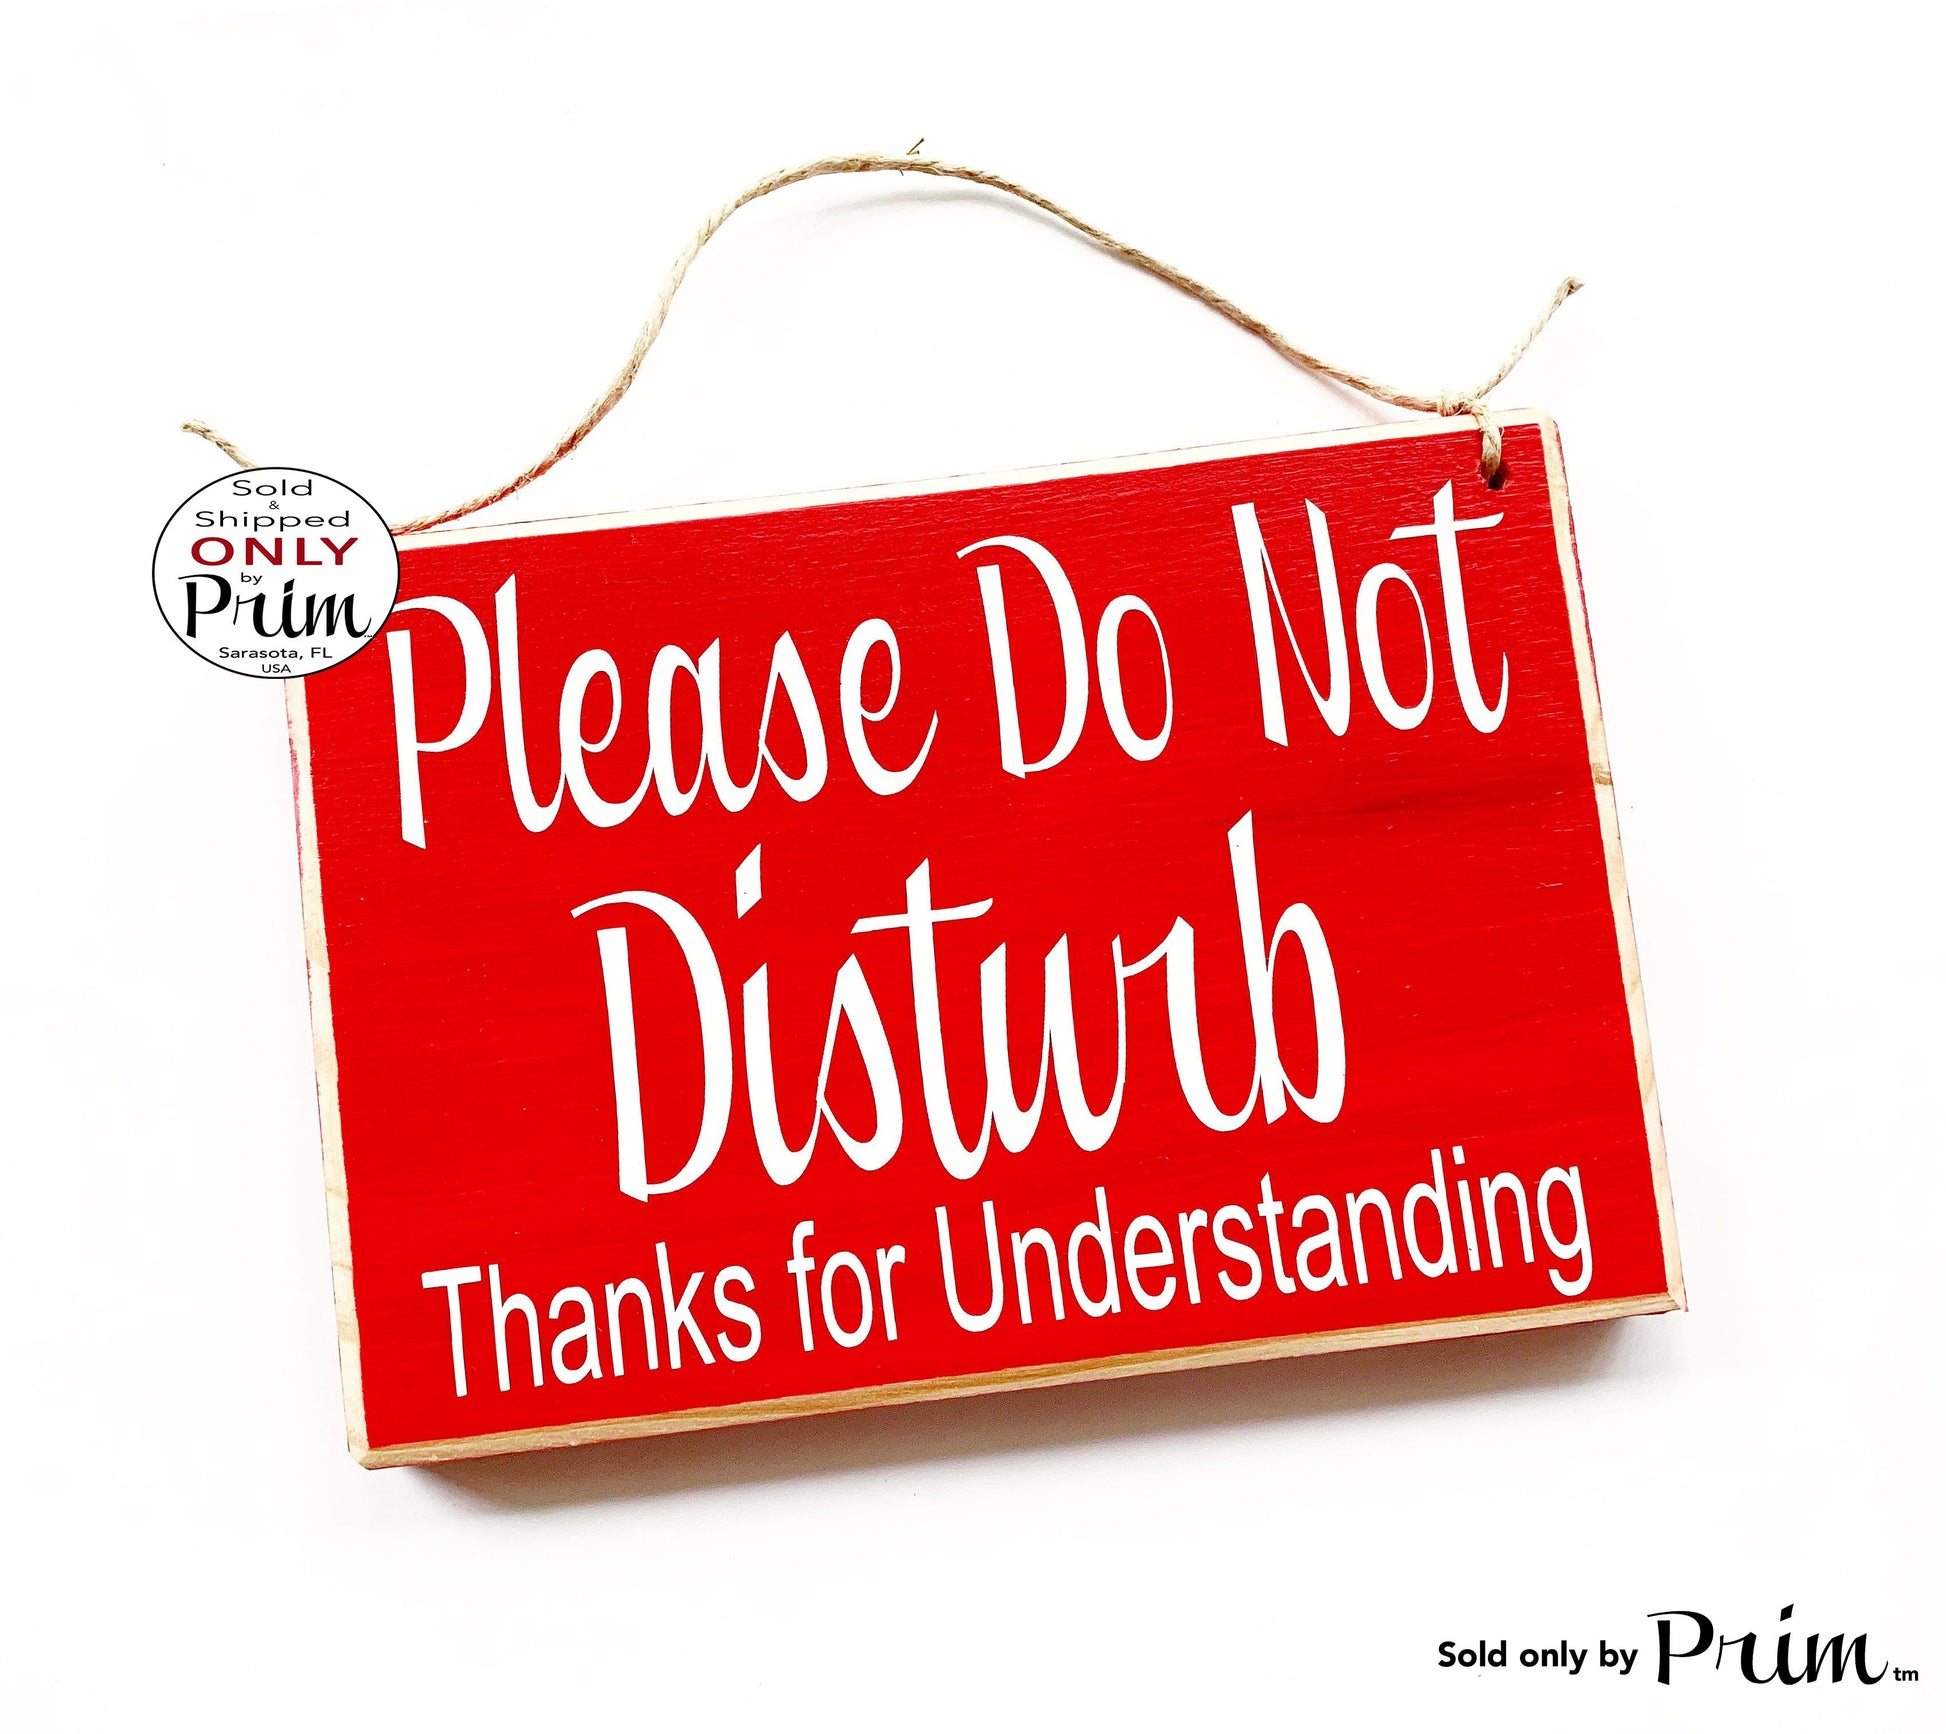 8x6 Please Do Not Disturb Thanks for Understanding Custom Wood Sign Counselor Progress Therapy Do Not Enter Private Meeting Door Plaque